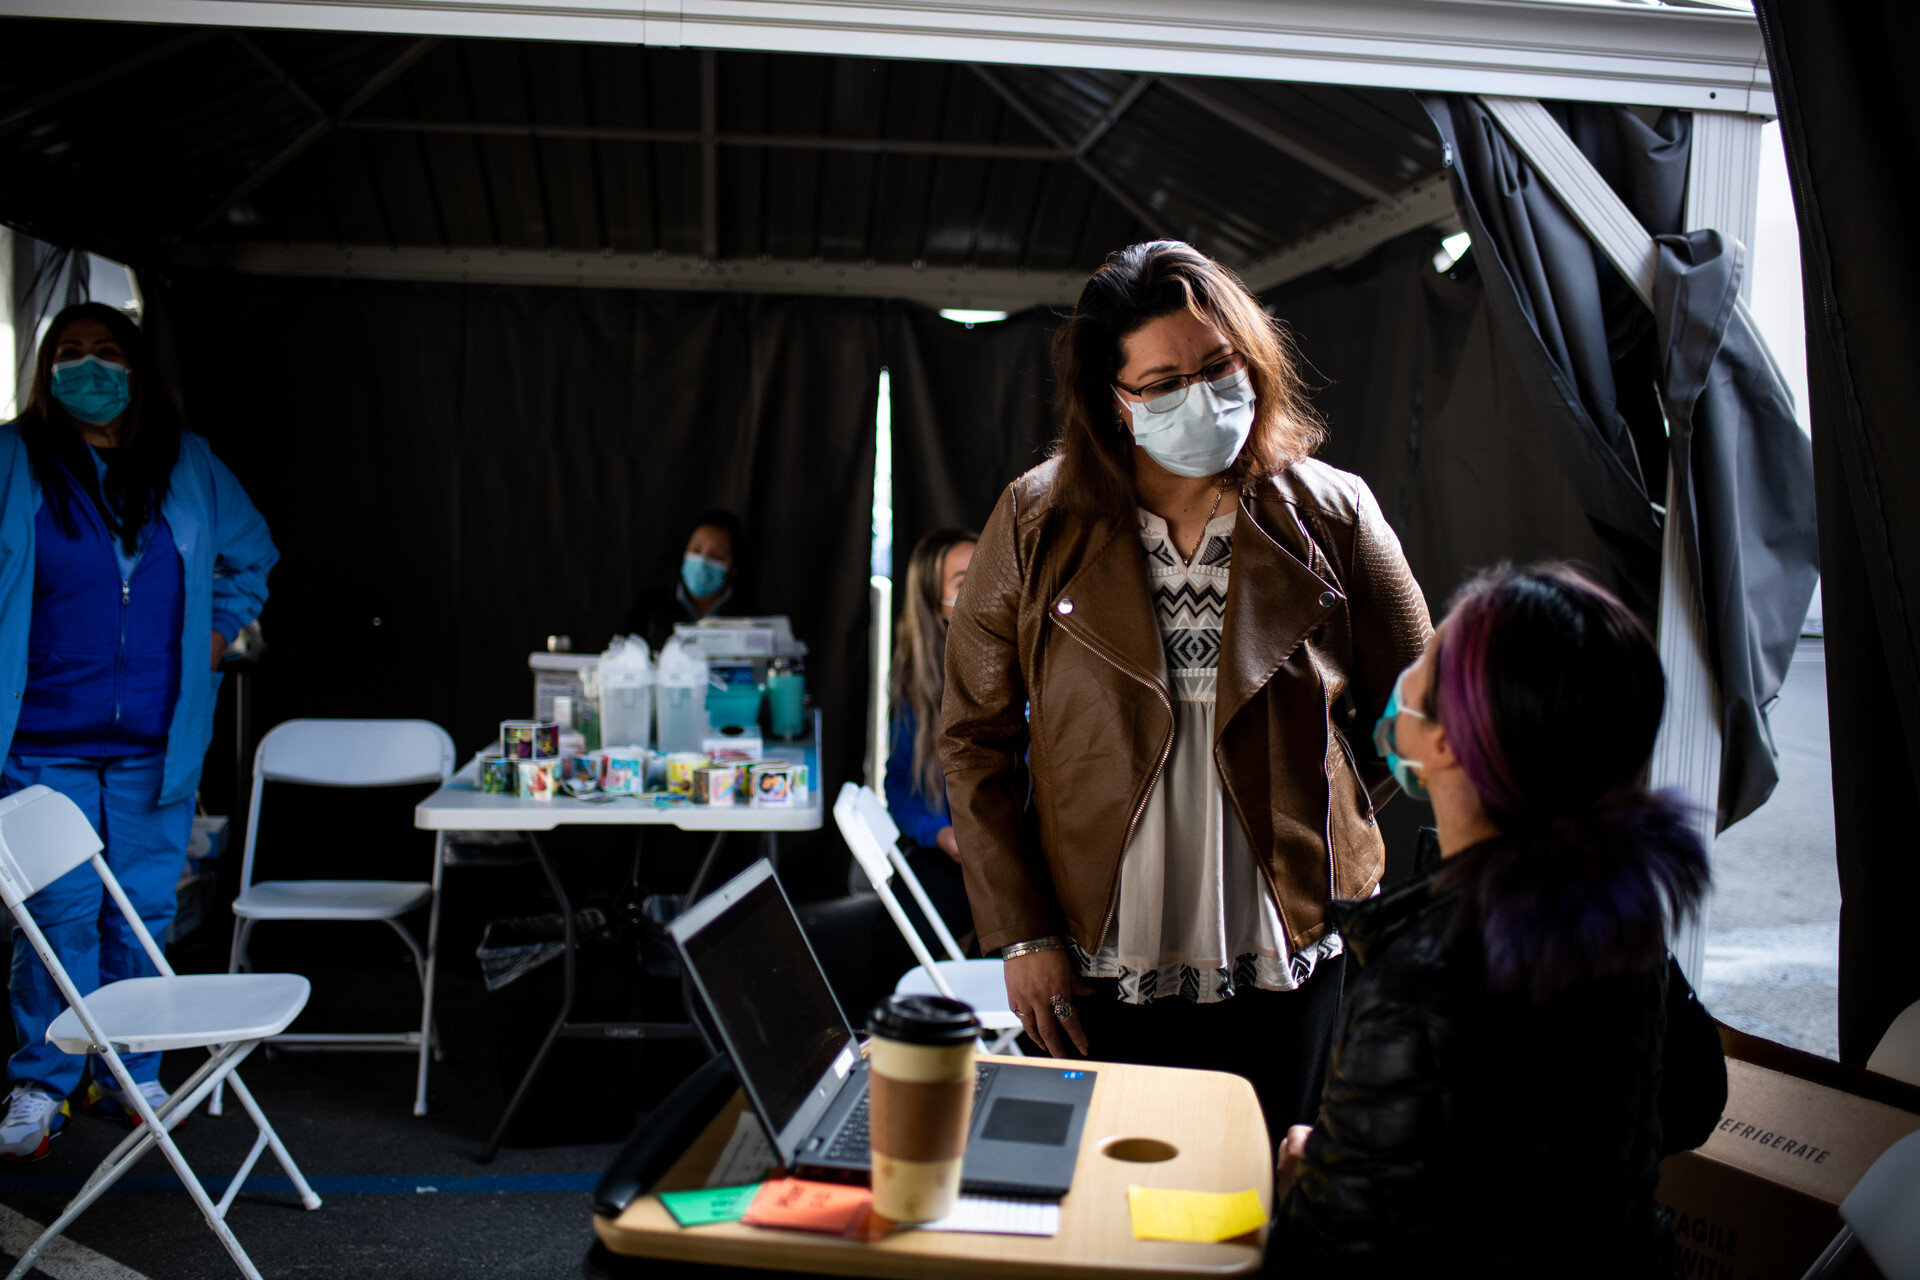 masked woman stands looking down at another masked nurse seated at a portable table, under tents at an outdoor COVID vaccination clinic